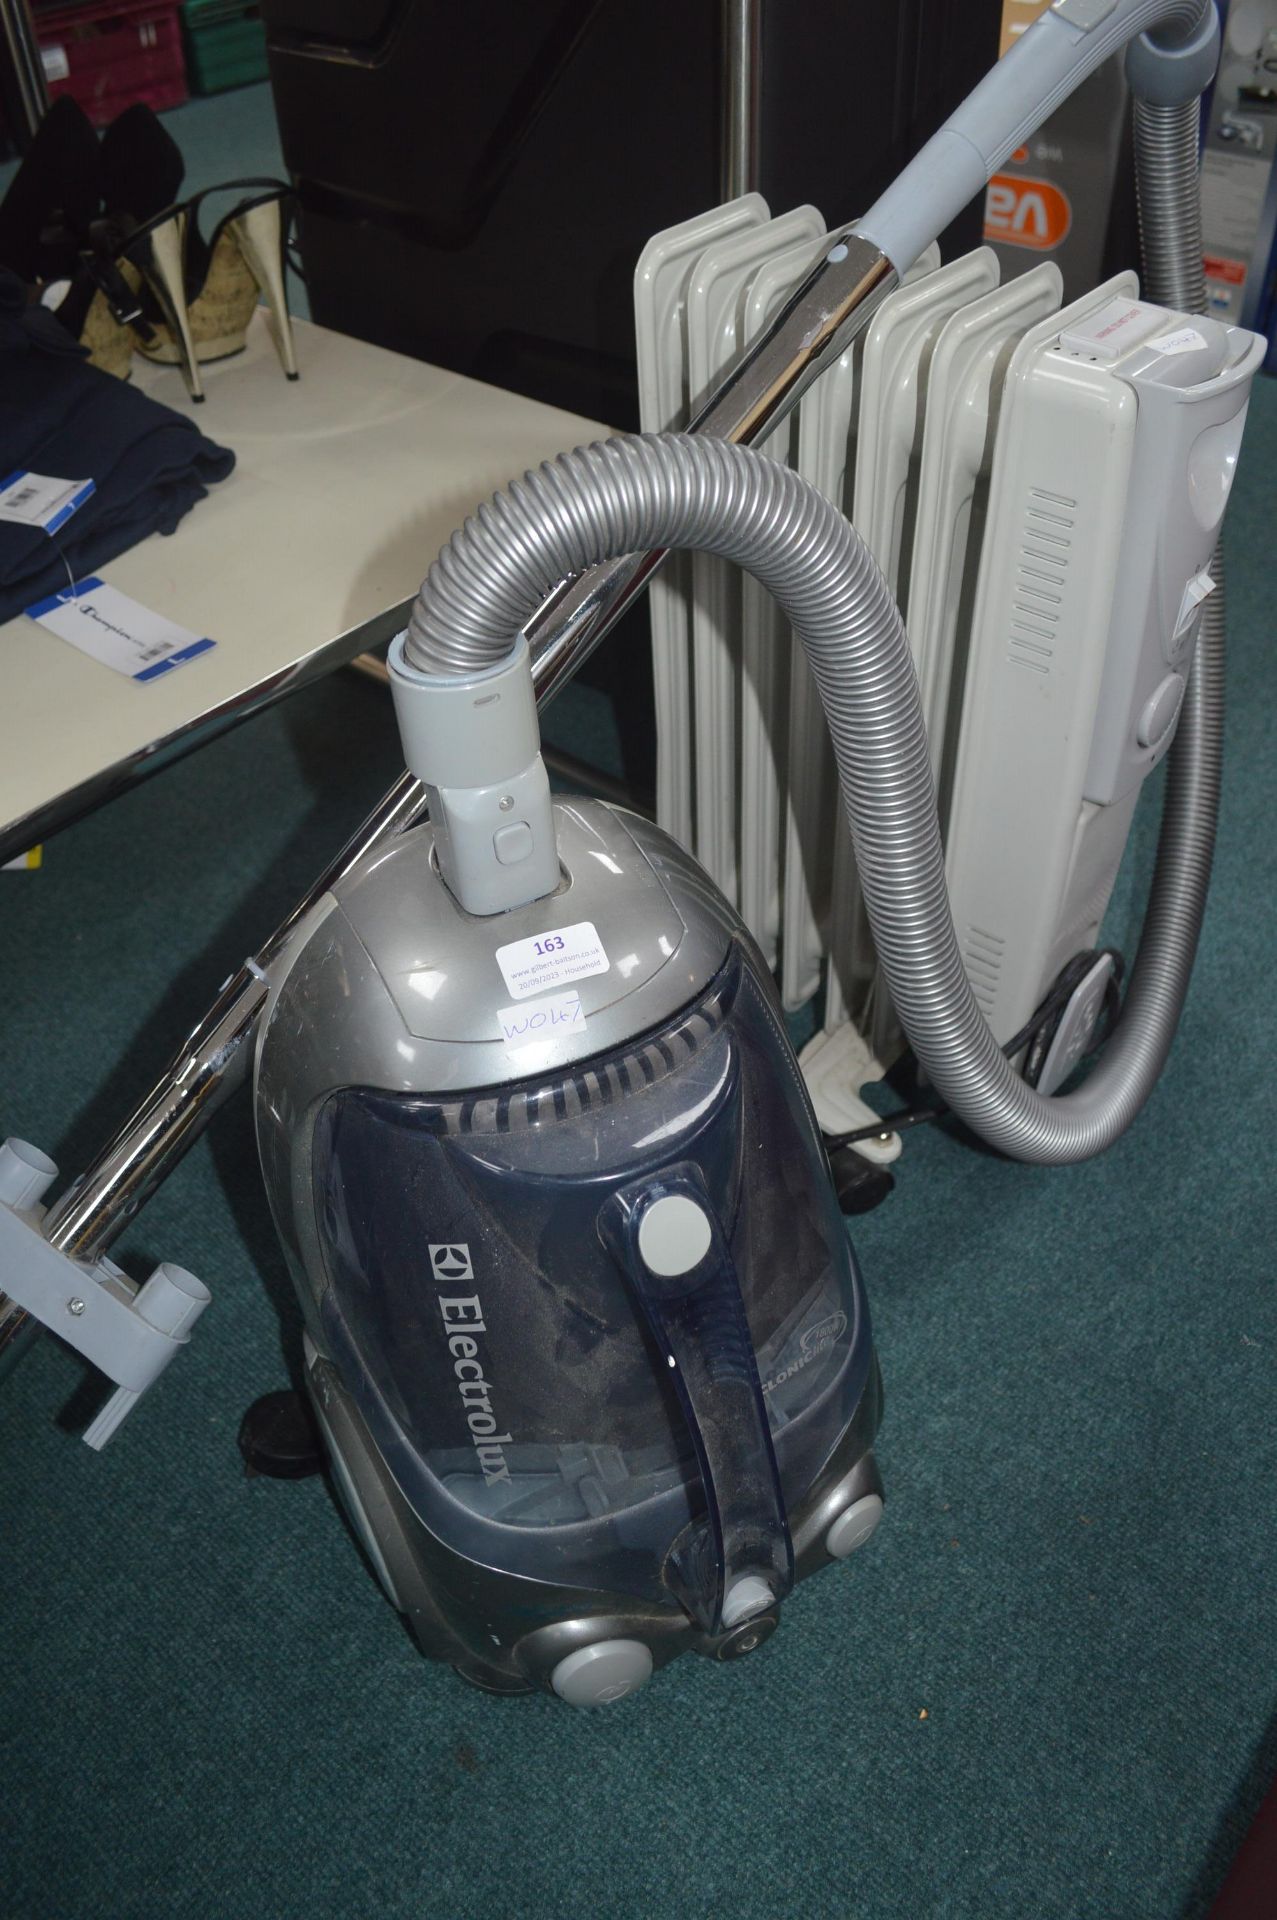 Electrolux Vacuum Cleaner, and an Oil Filled Radia